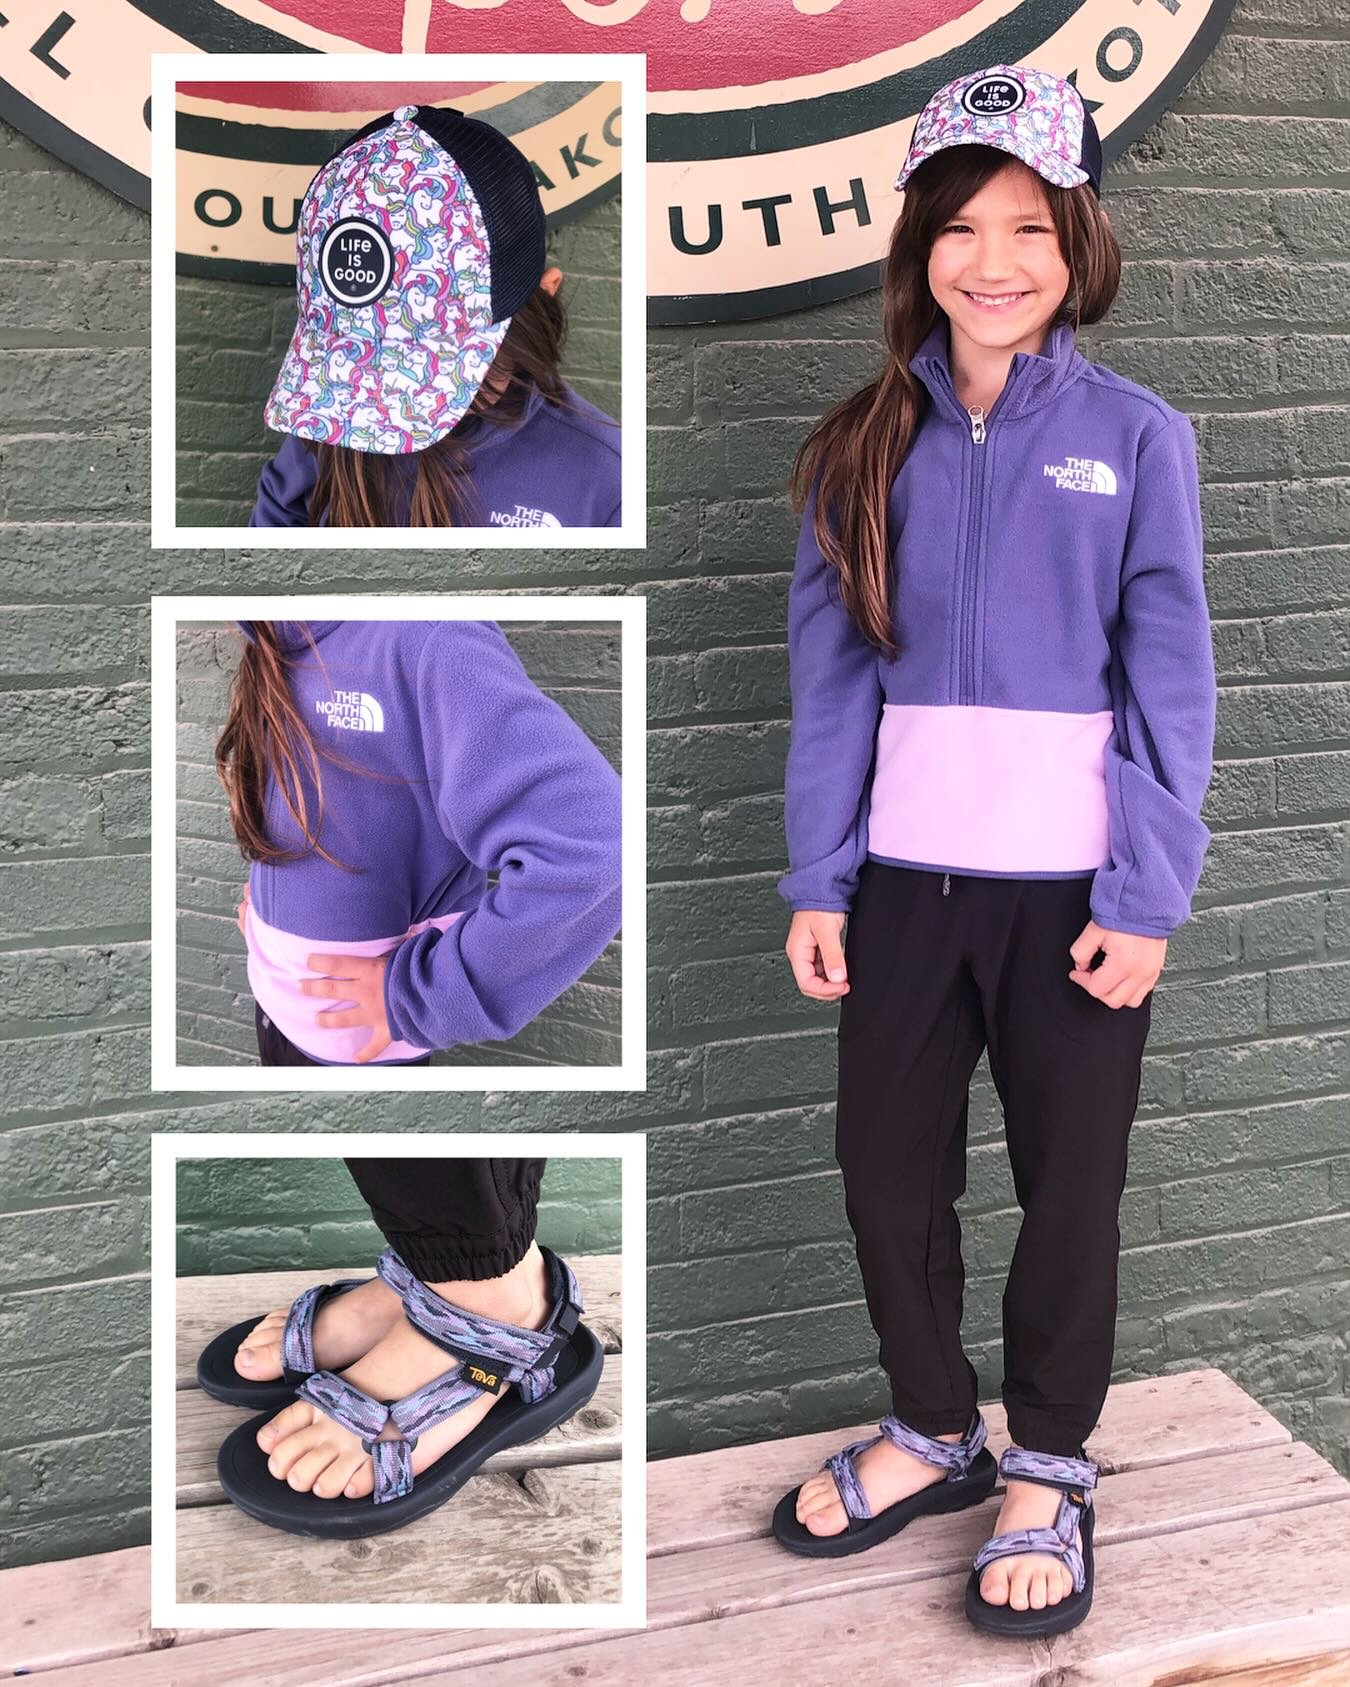 From puddle-jumping to tree-climbing, backyard play dates to epic camping trips, our kids&rsquo; apparel keeps up with every adventure! 🌈 #PlayAllDay #KidsFashion #shopsmall #shoplocal #miniexplorers #outdoorkids #blackhills #hillcitysd